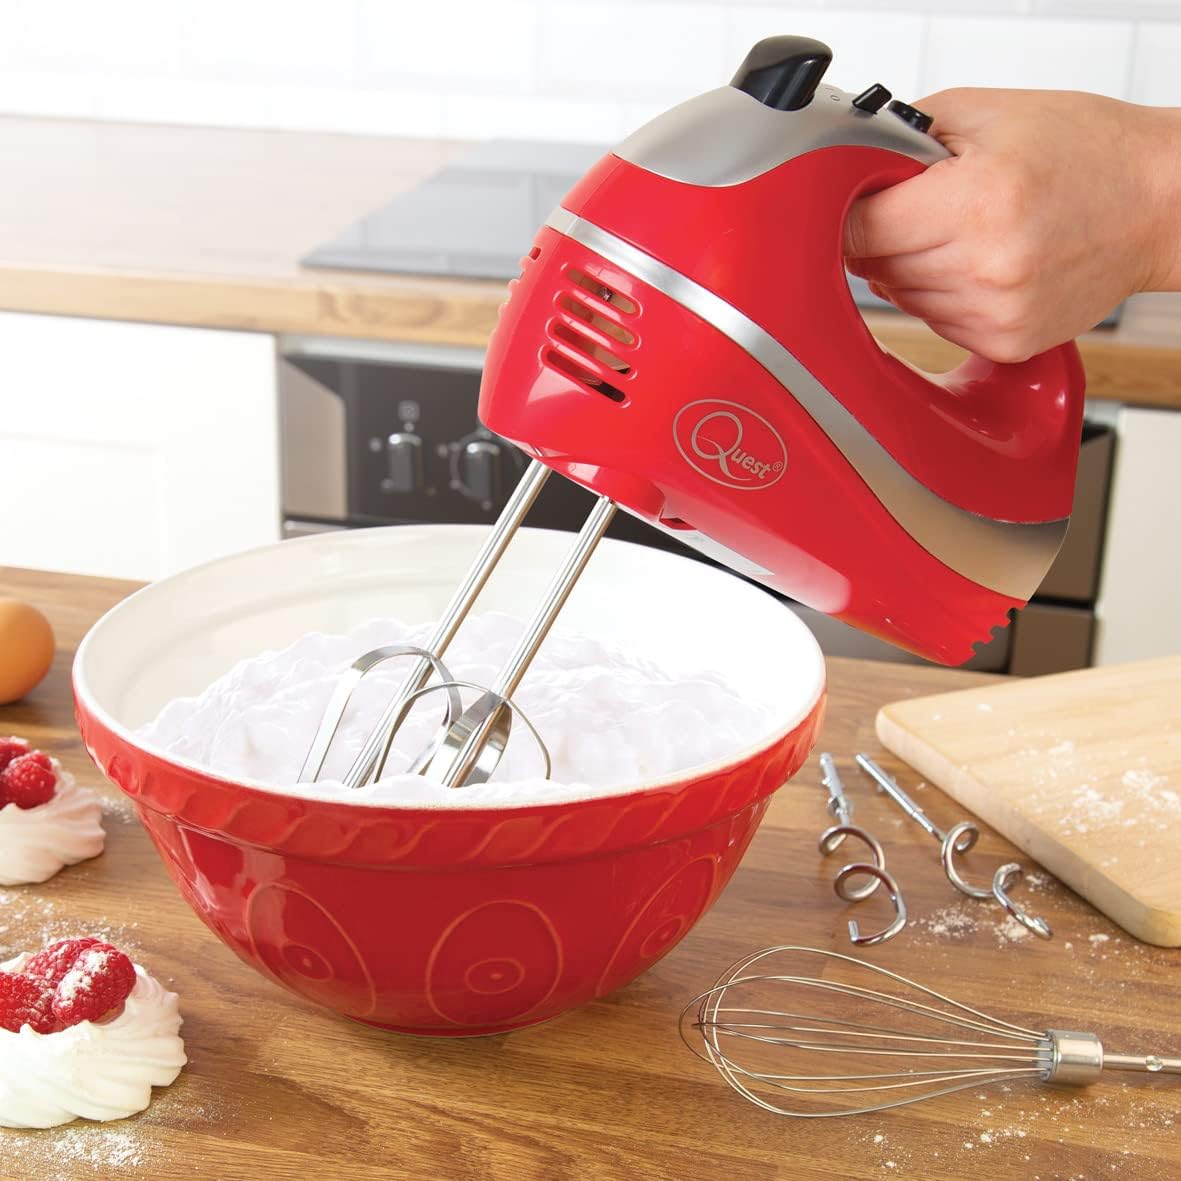 Quest 35820 Electric Hand Mixer / Complete With Chrome Beaters, Dough Hooks & Balloon Whisk / 5 Speed With Turbo Function / 300W / Red Colour - Amazing Gadgets Outlet